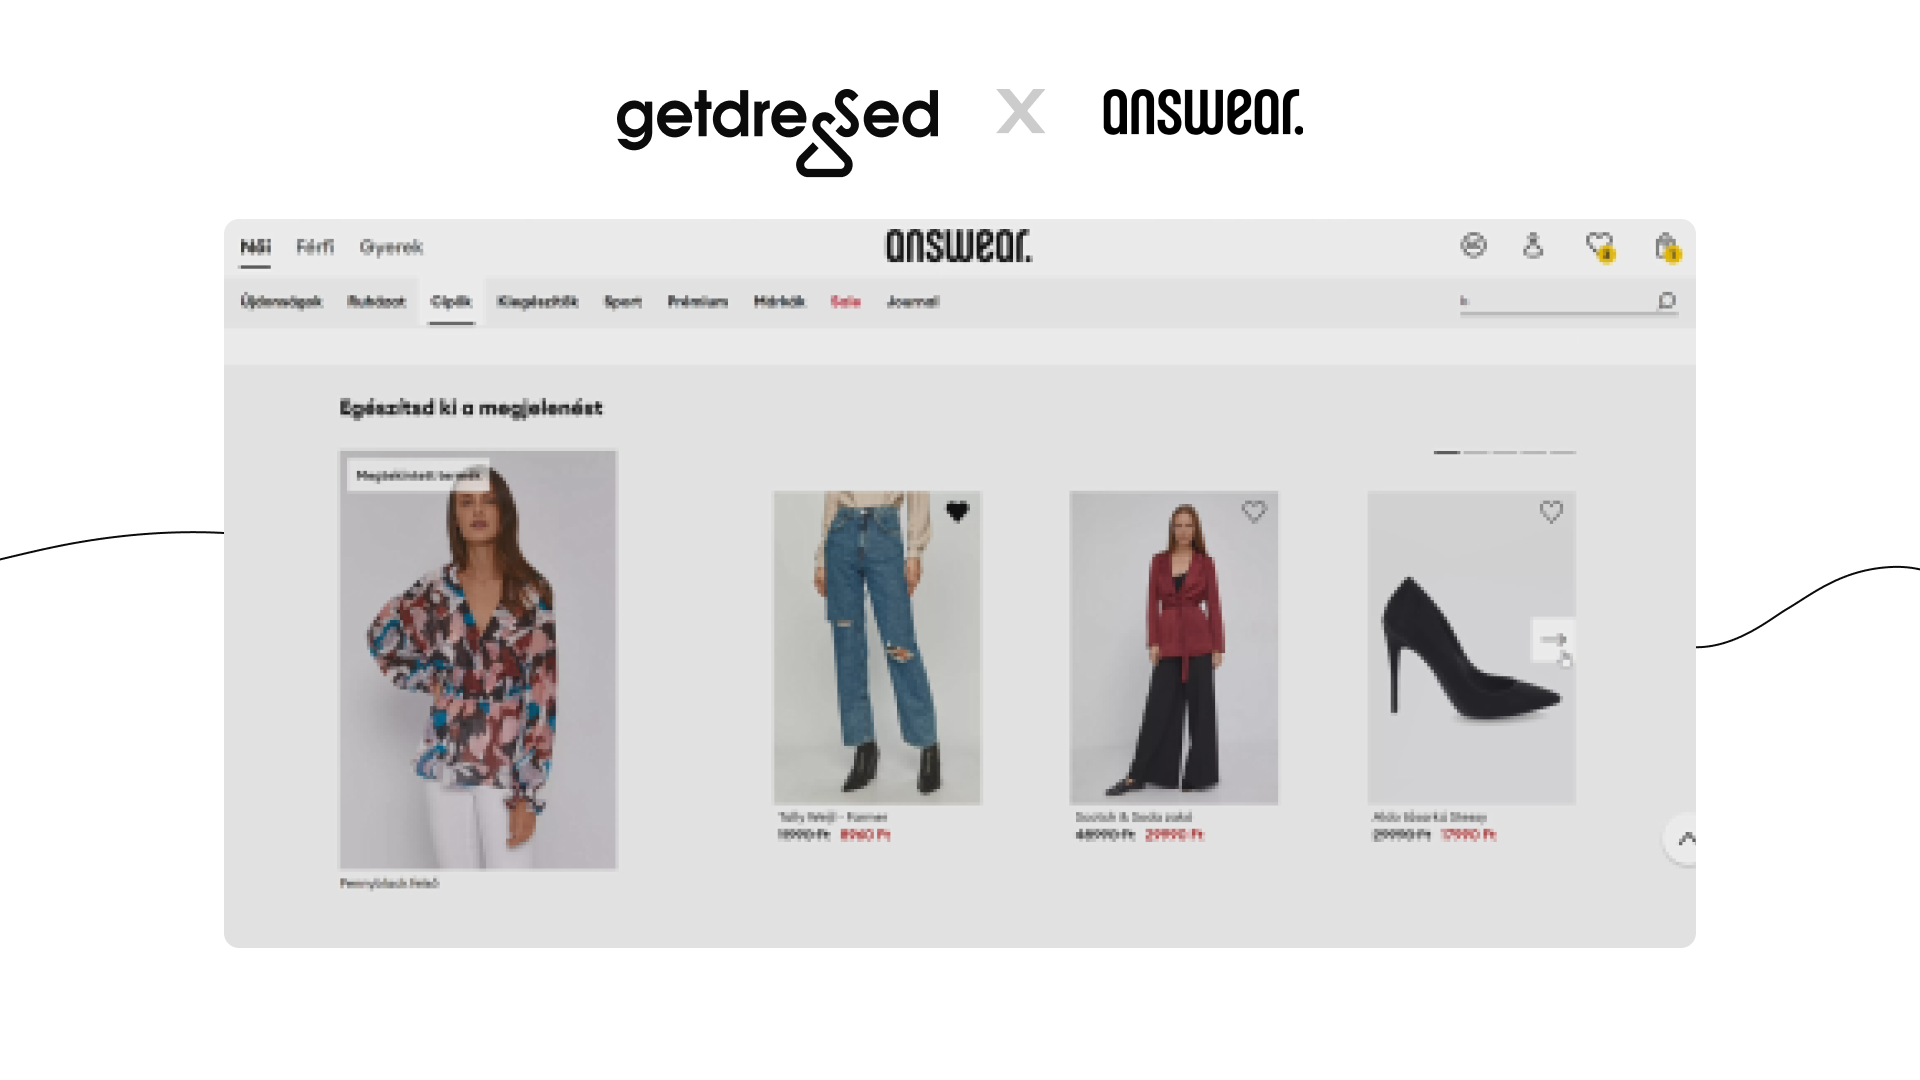 Answear.com x getdressed: 4 MLN outfits in 1 month